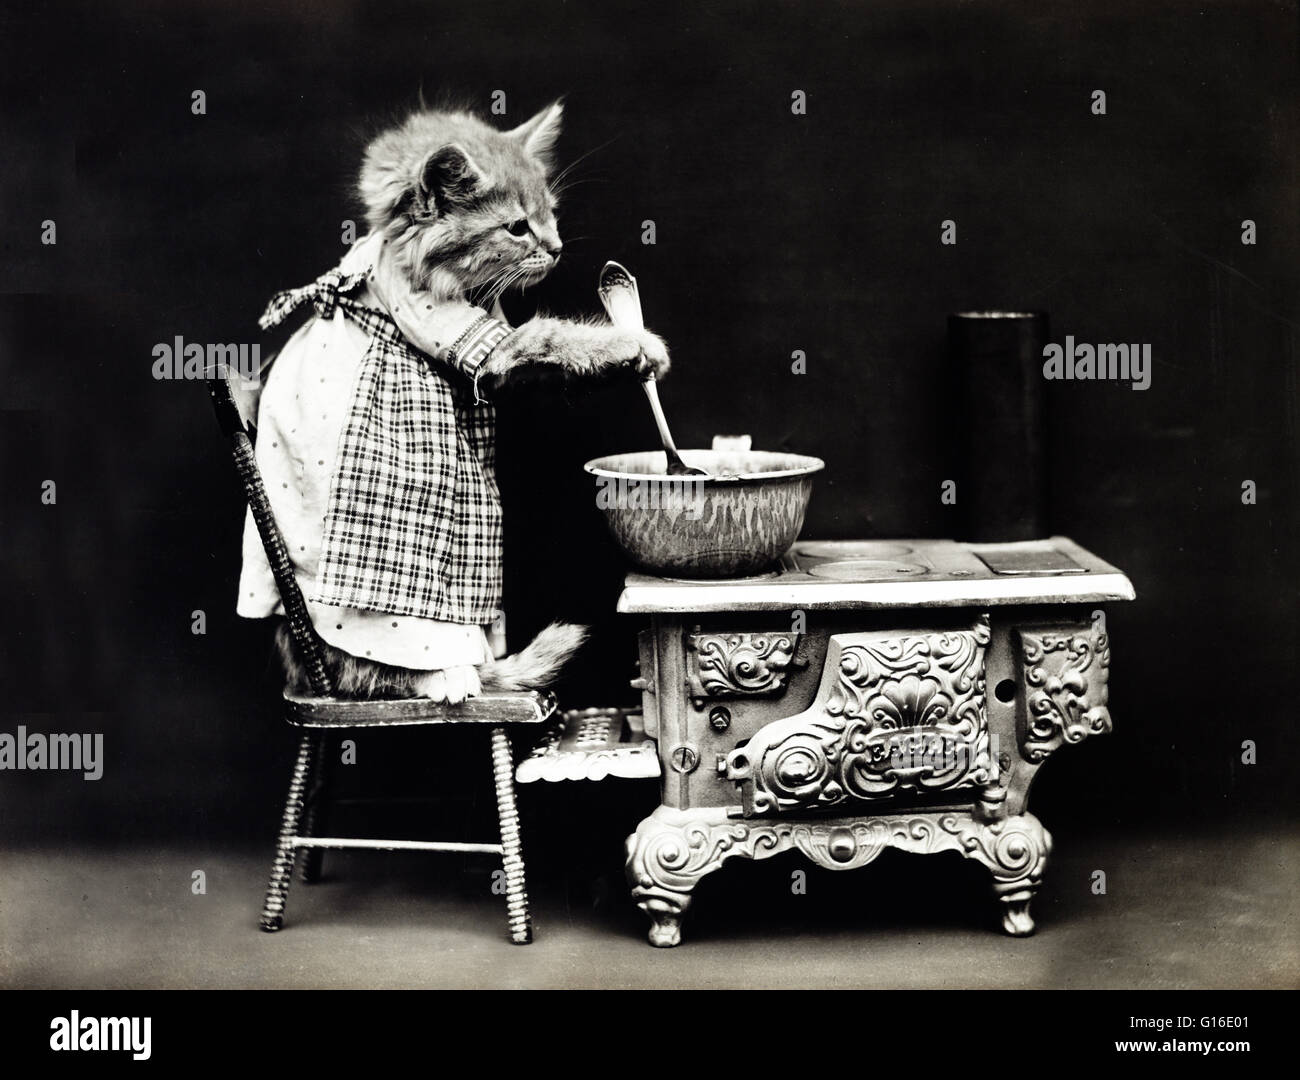 Entitled: 'The cook' shows a kitten wearing a dress and stirring at a stove. Harry Whittier Frees (1879 - 1953) was an American photographer who photographed live animals dressed and posed in human situations with props. His animal photos were featured on Stock Photo